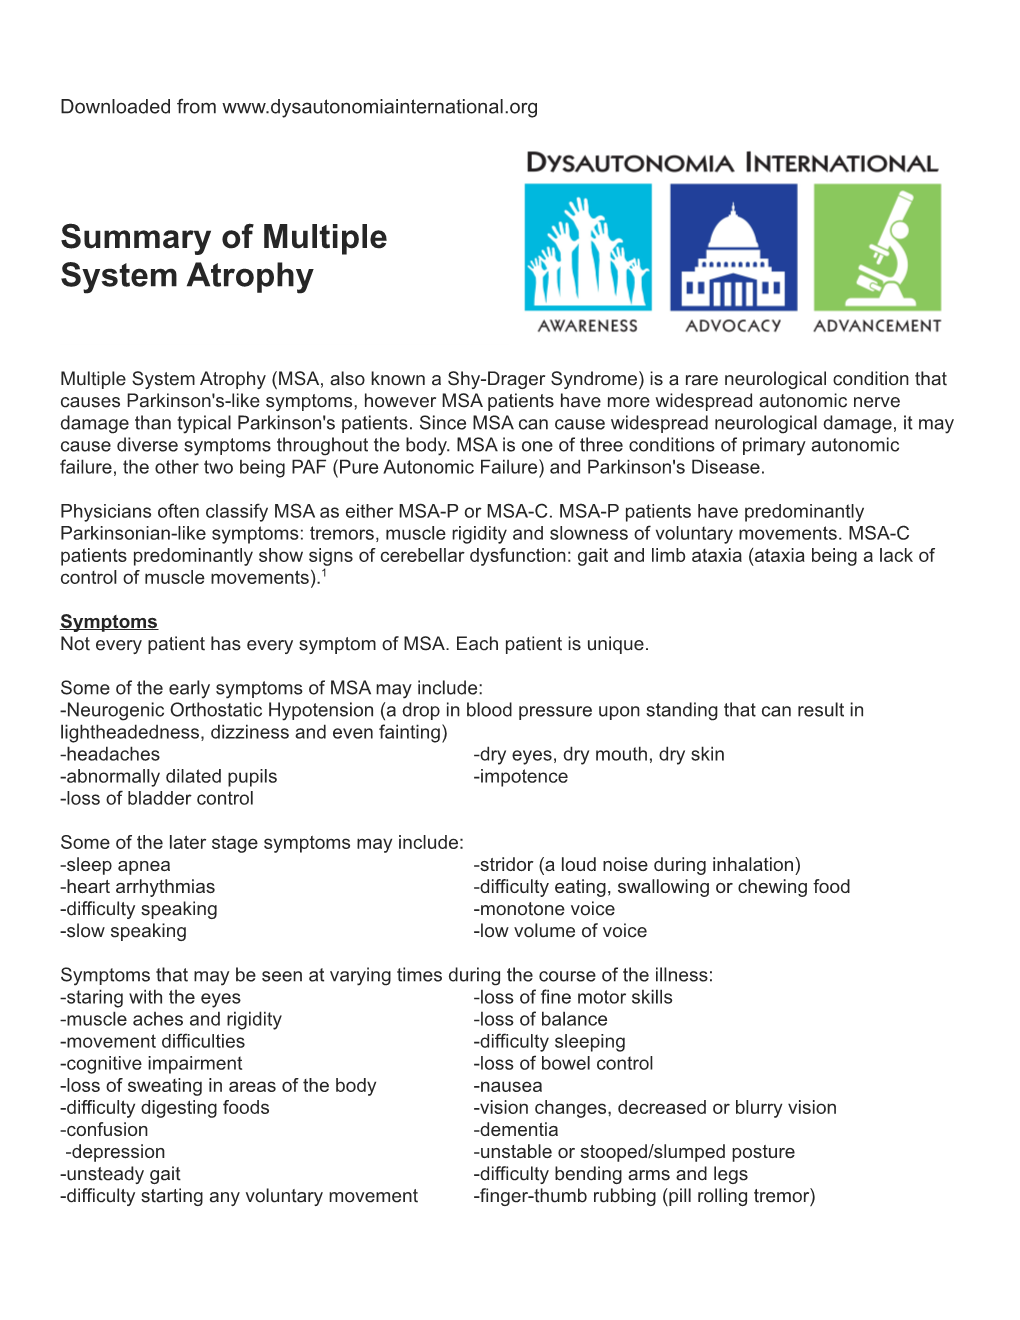 Summary of Multiple System Atrophy